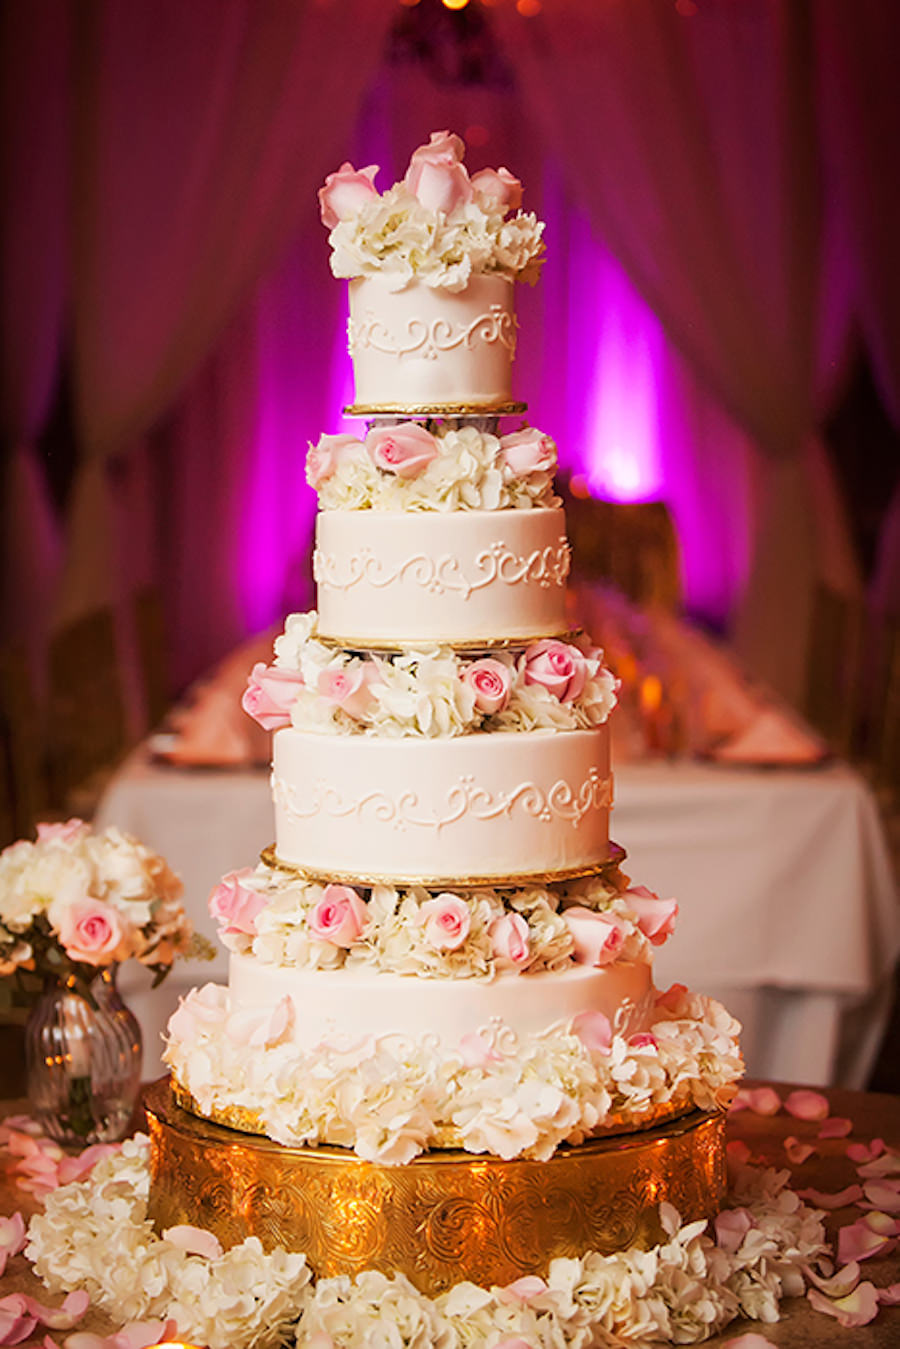 Four Tier Round Ivory Wedding Cake with Light Pink Roses and Ivory Hydrangeas on Gold Ornate Cake Stand | St Pete Wedding Photographer Limelight Photography